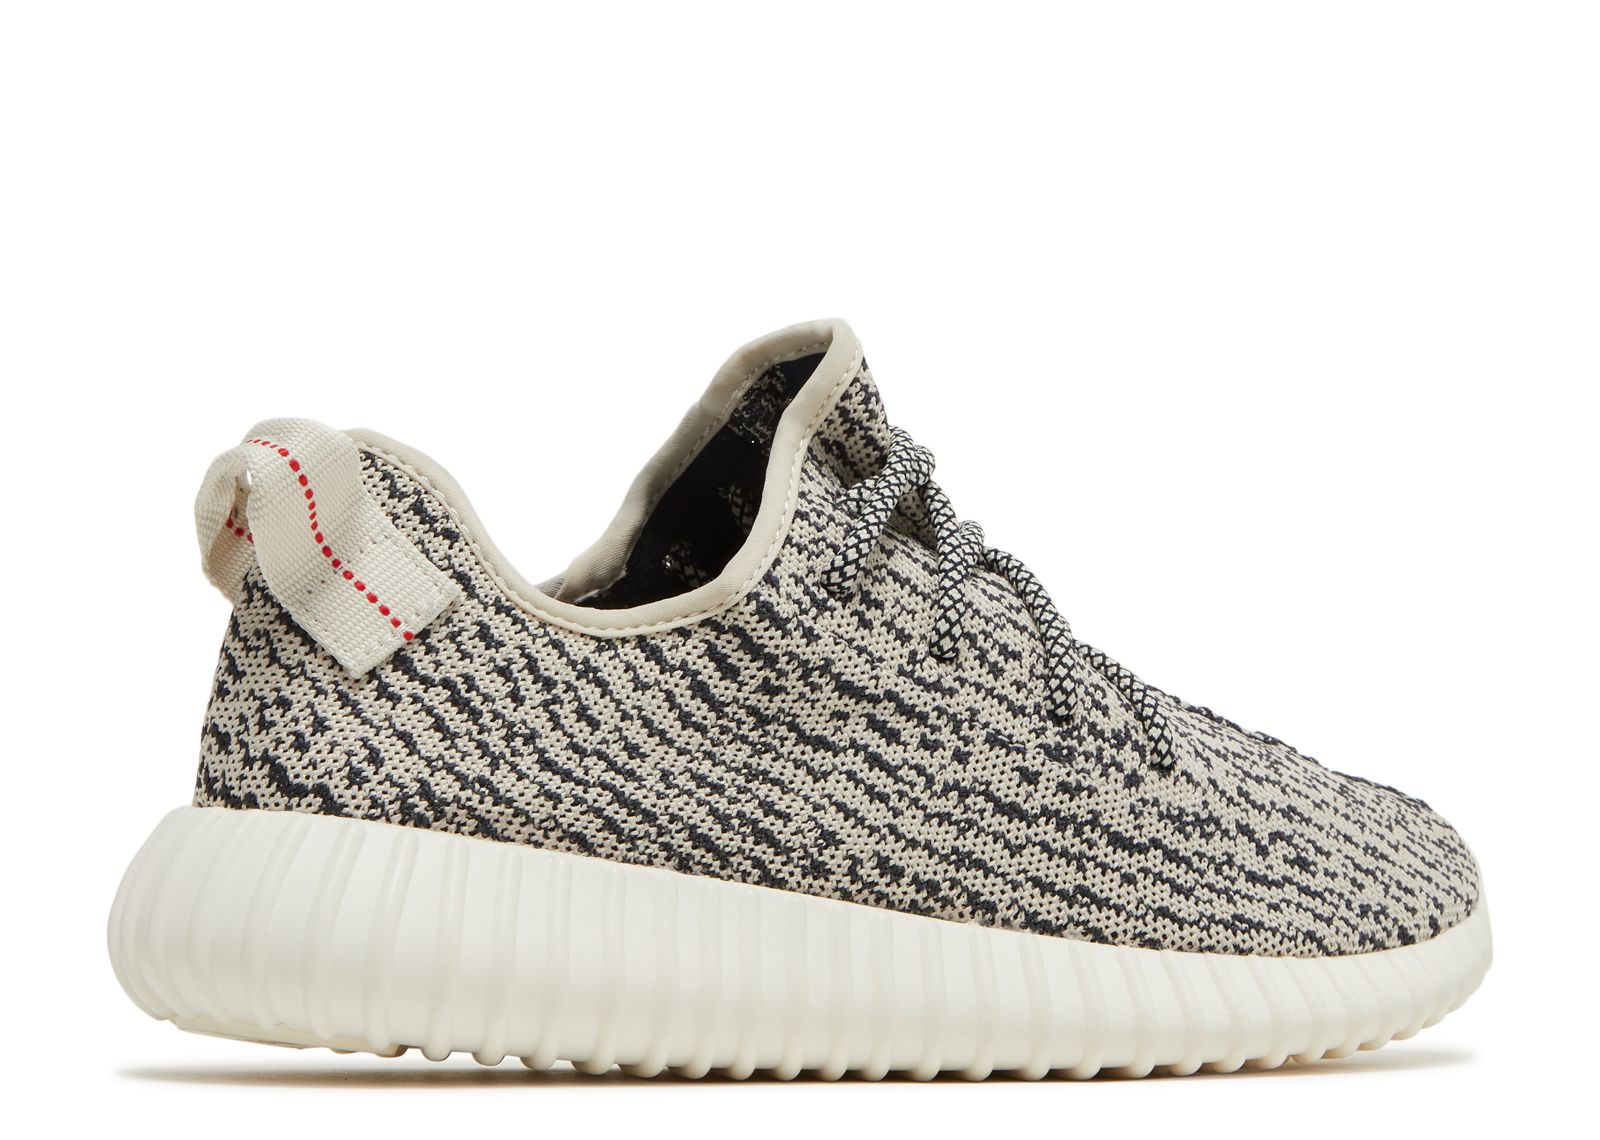 The Toddler Yeezy Boosts Come In 